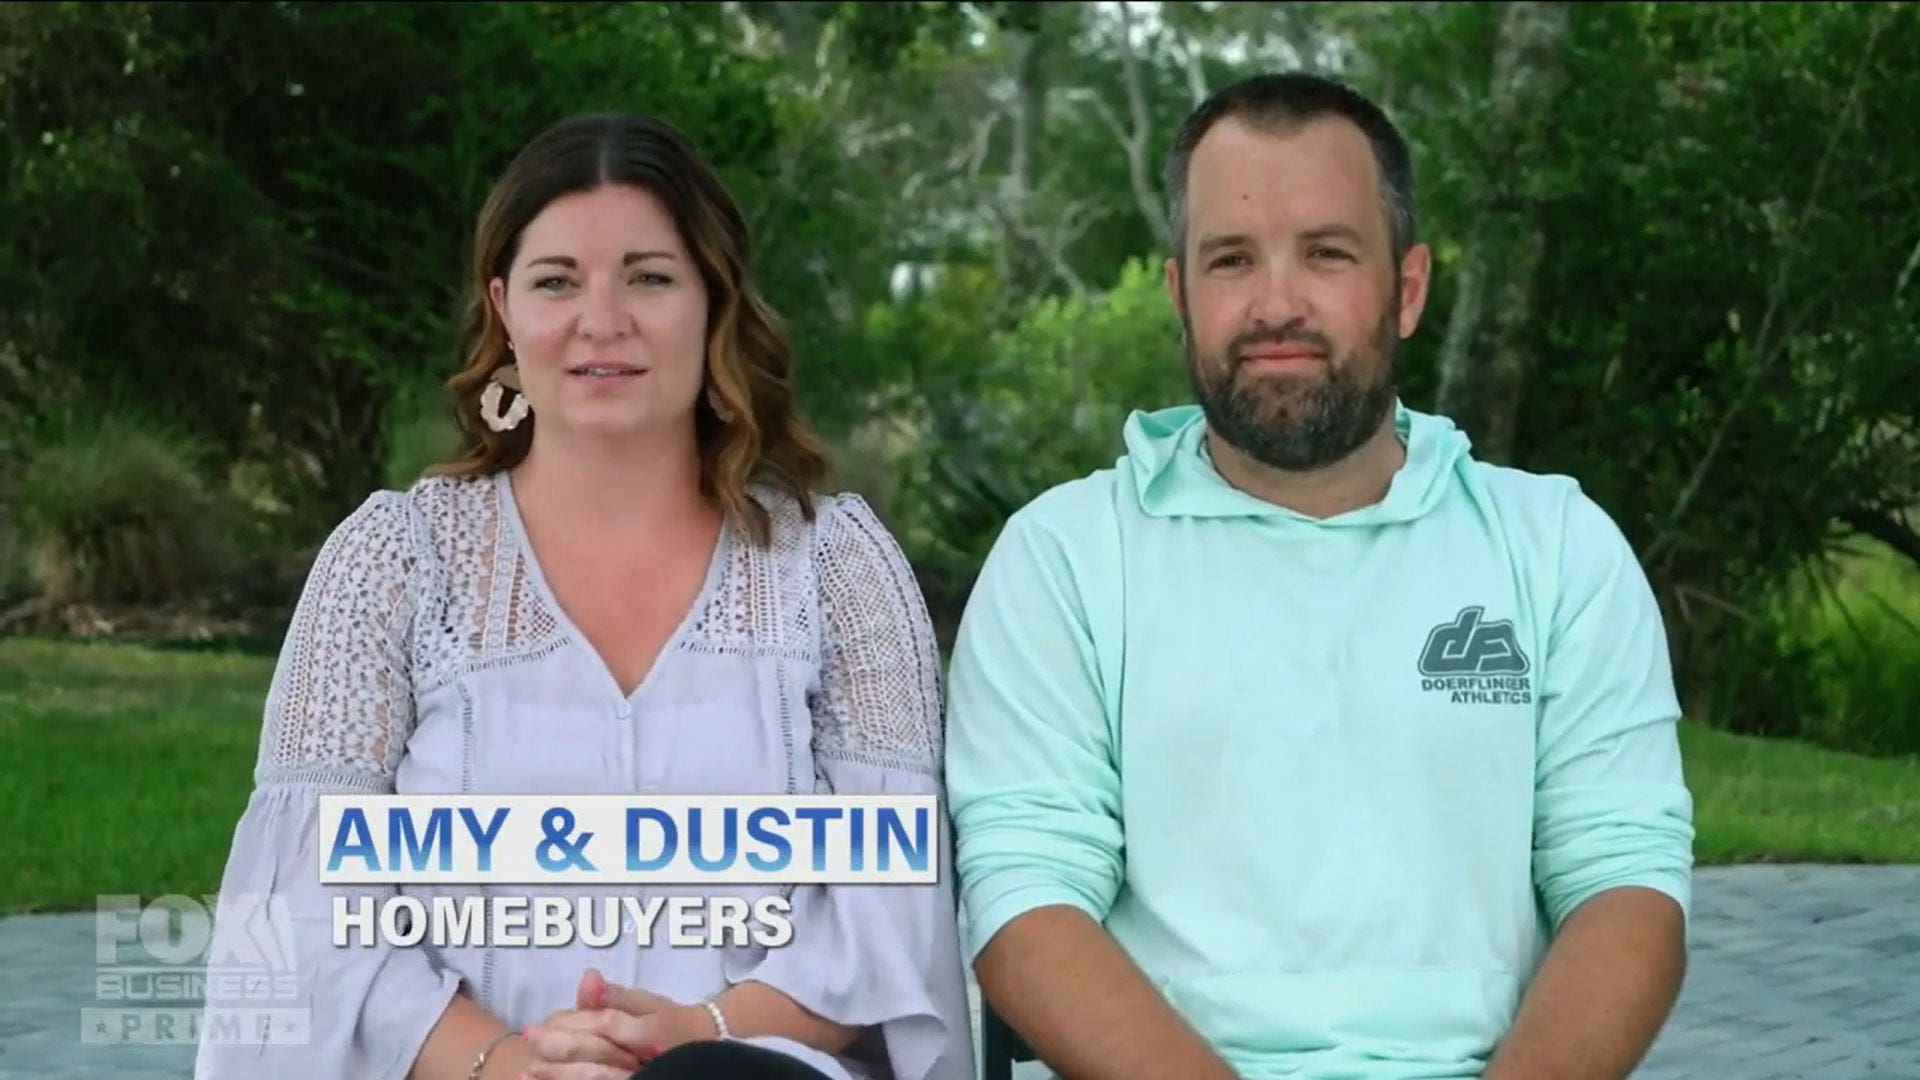 Parents of two find their 'American Dream Home' in Beaufort, South